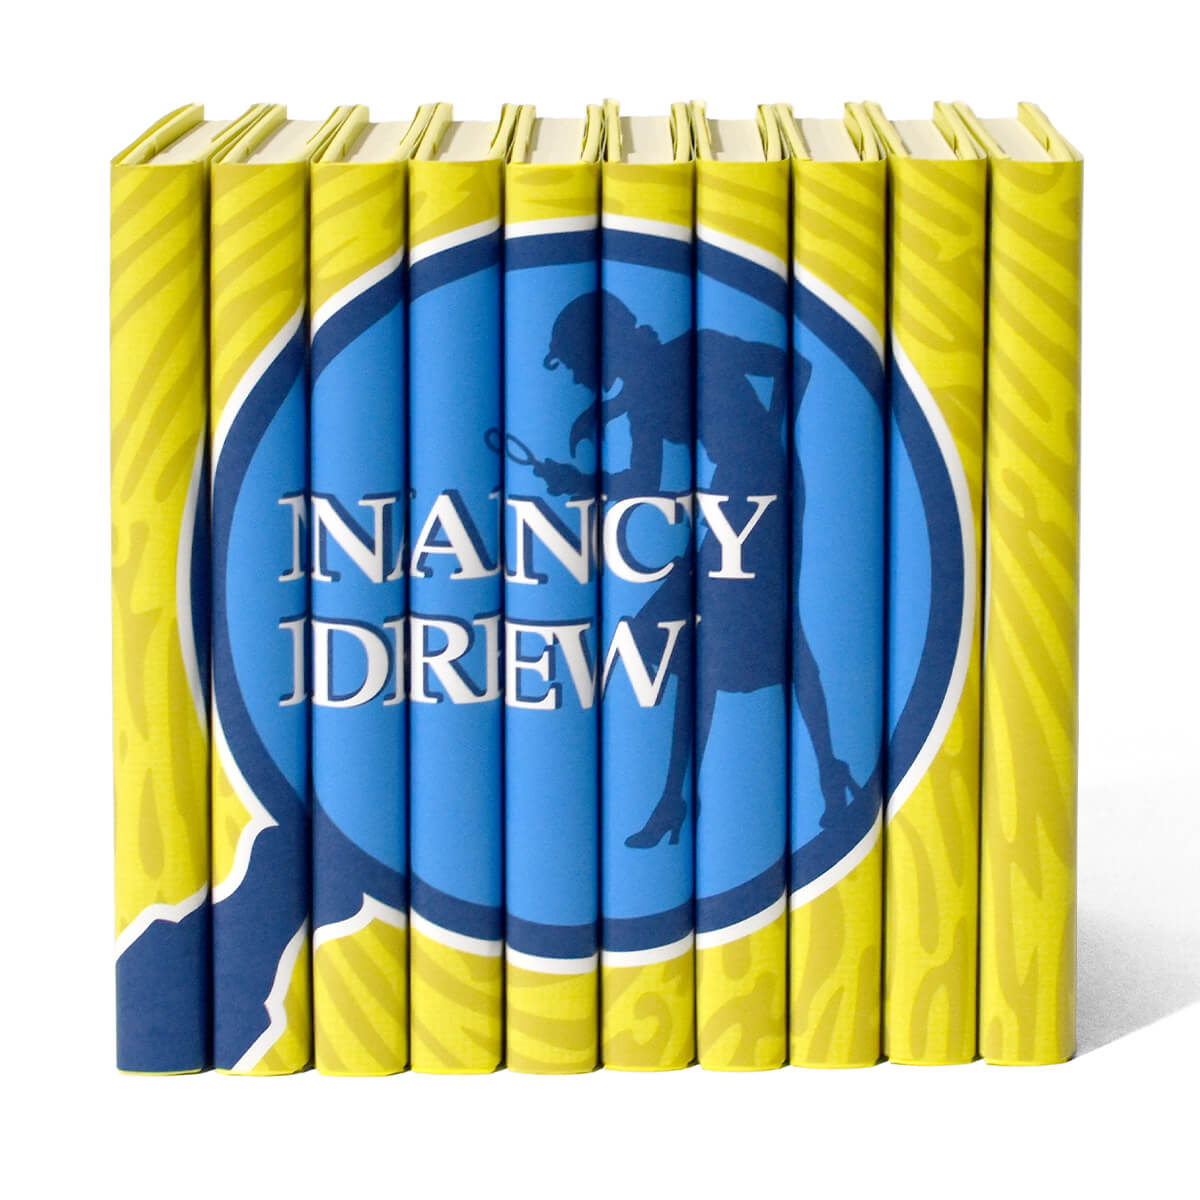 Nancy Drew ten book collection, children's classics book set wrapped in customizable dust covers. Our JuniperCustom book jackets will make your childhood favorites come alive all over again, or create a beautiful gift for the new reader in your life. Libraries across the world carry these books, but this curated custom set will stand out on your shelves like none other.